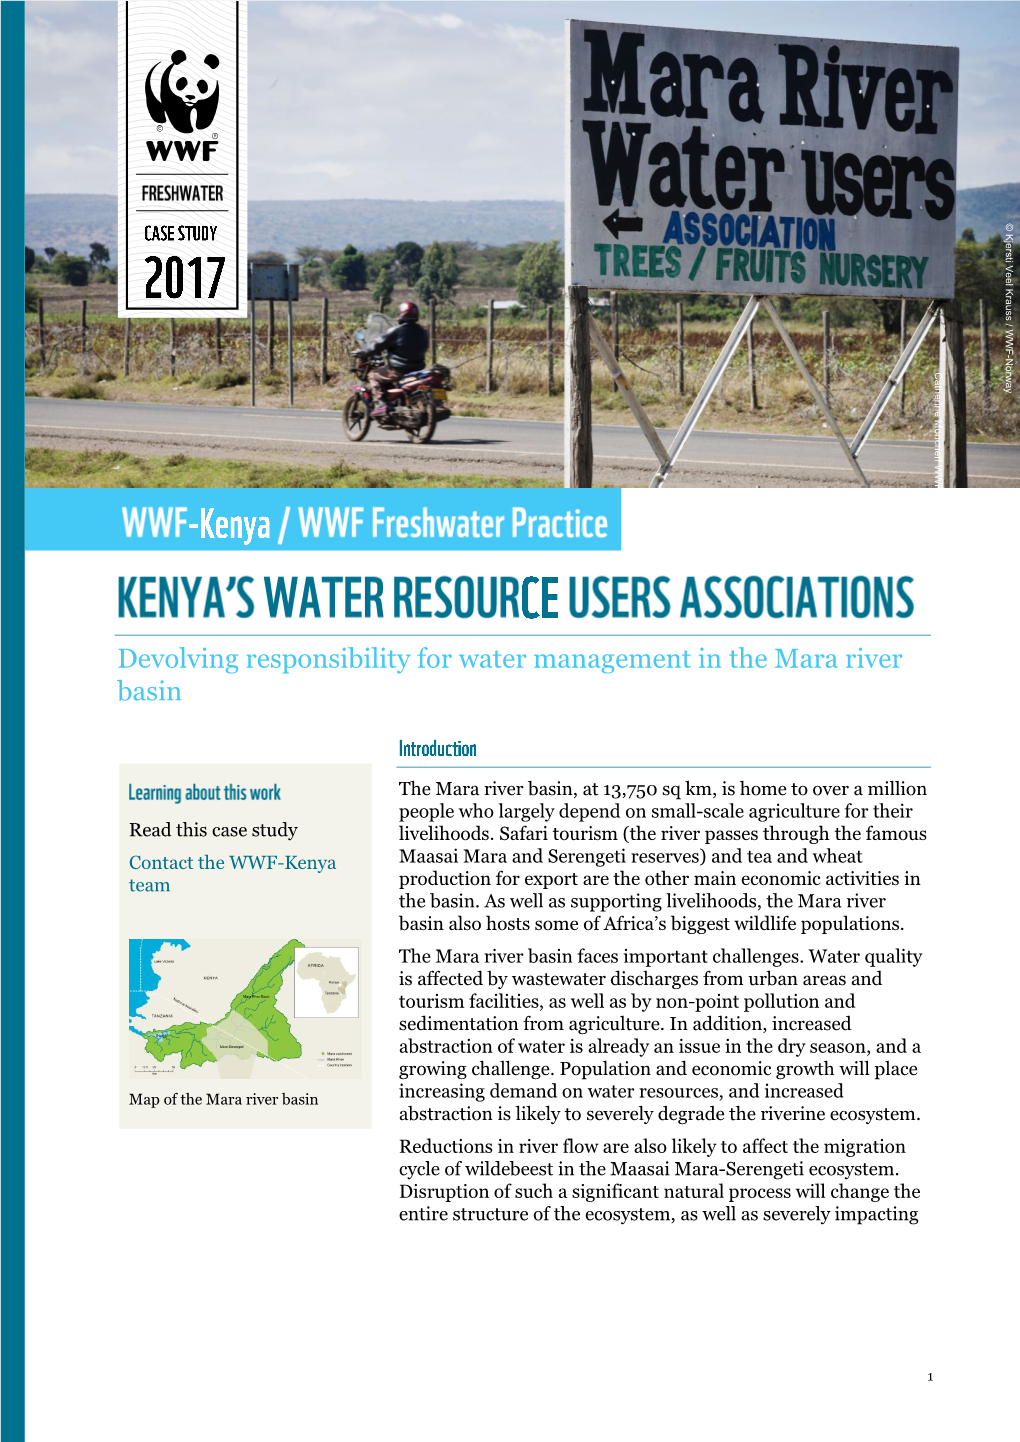 Devolving Responsibility for Water Management in the Mara River Basin